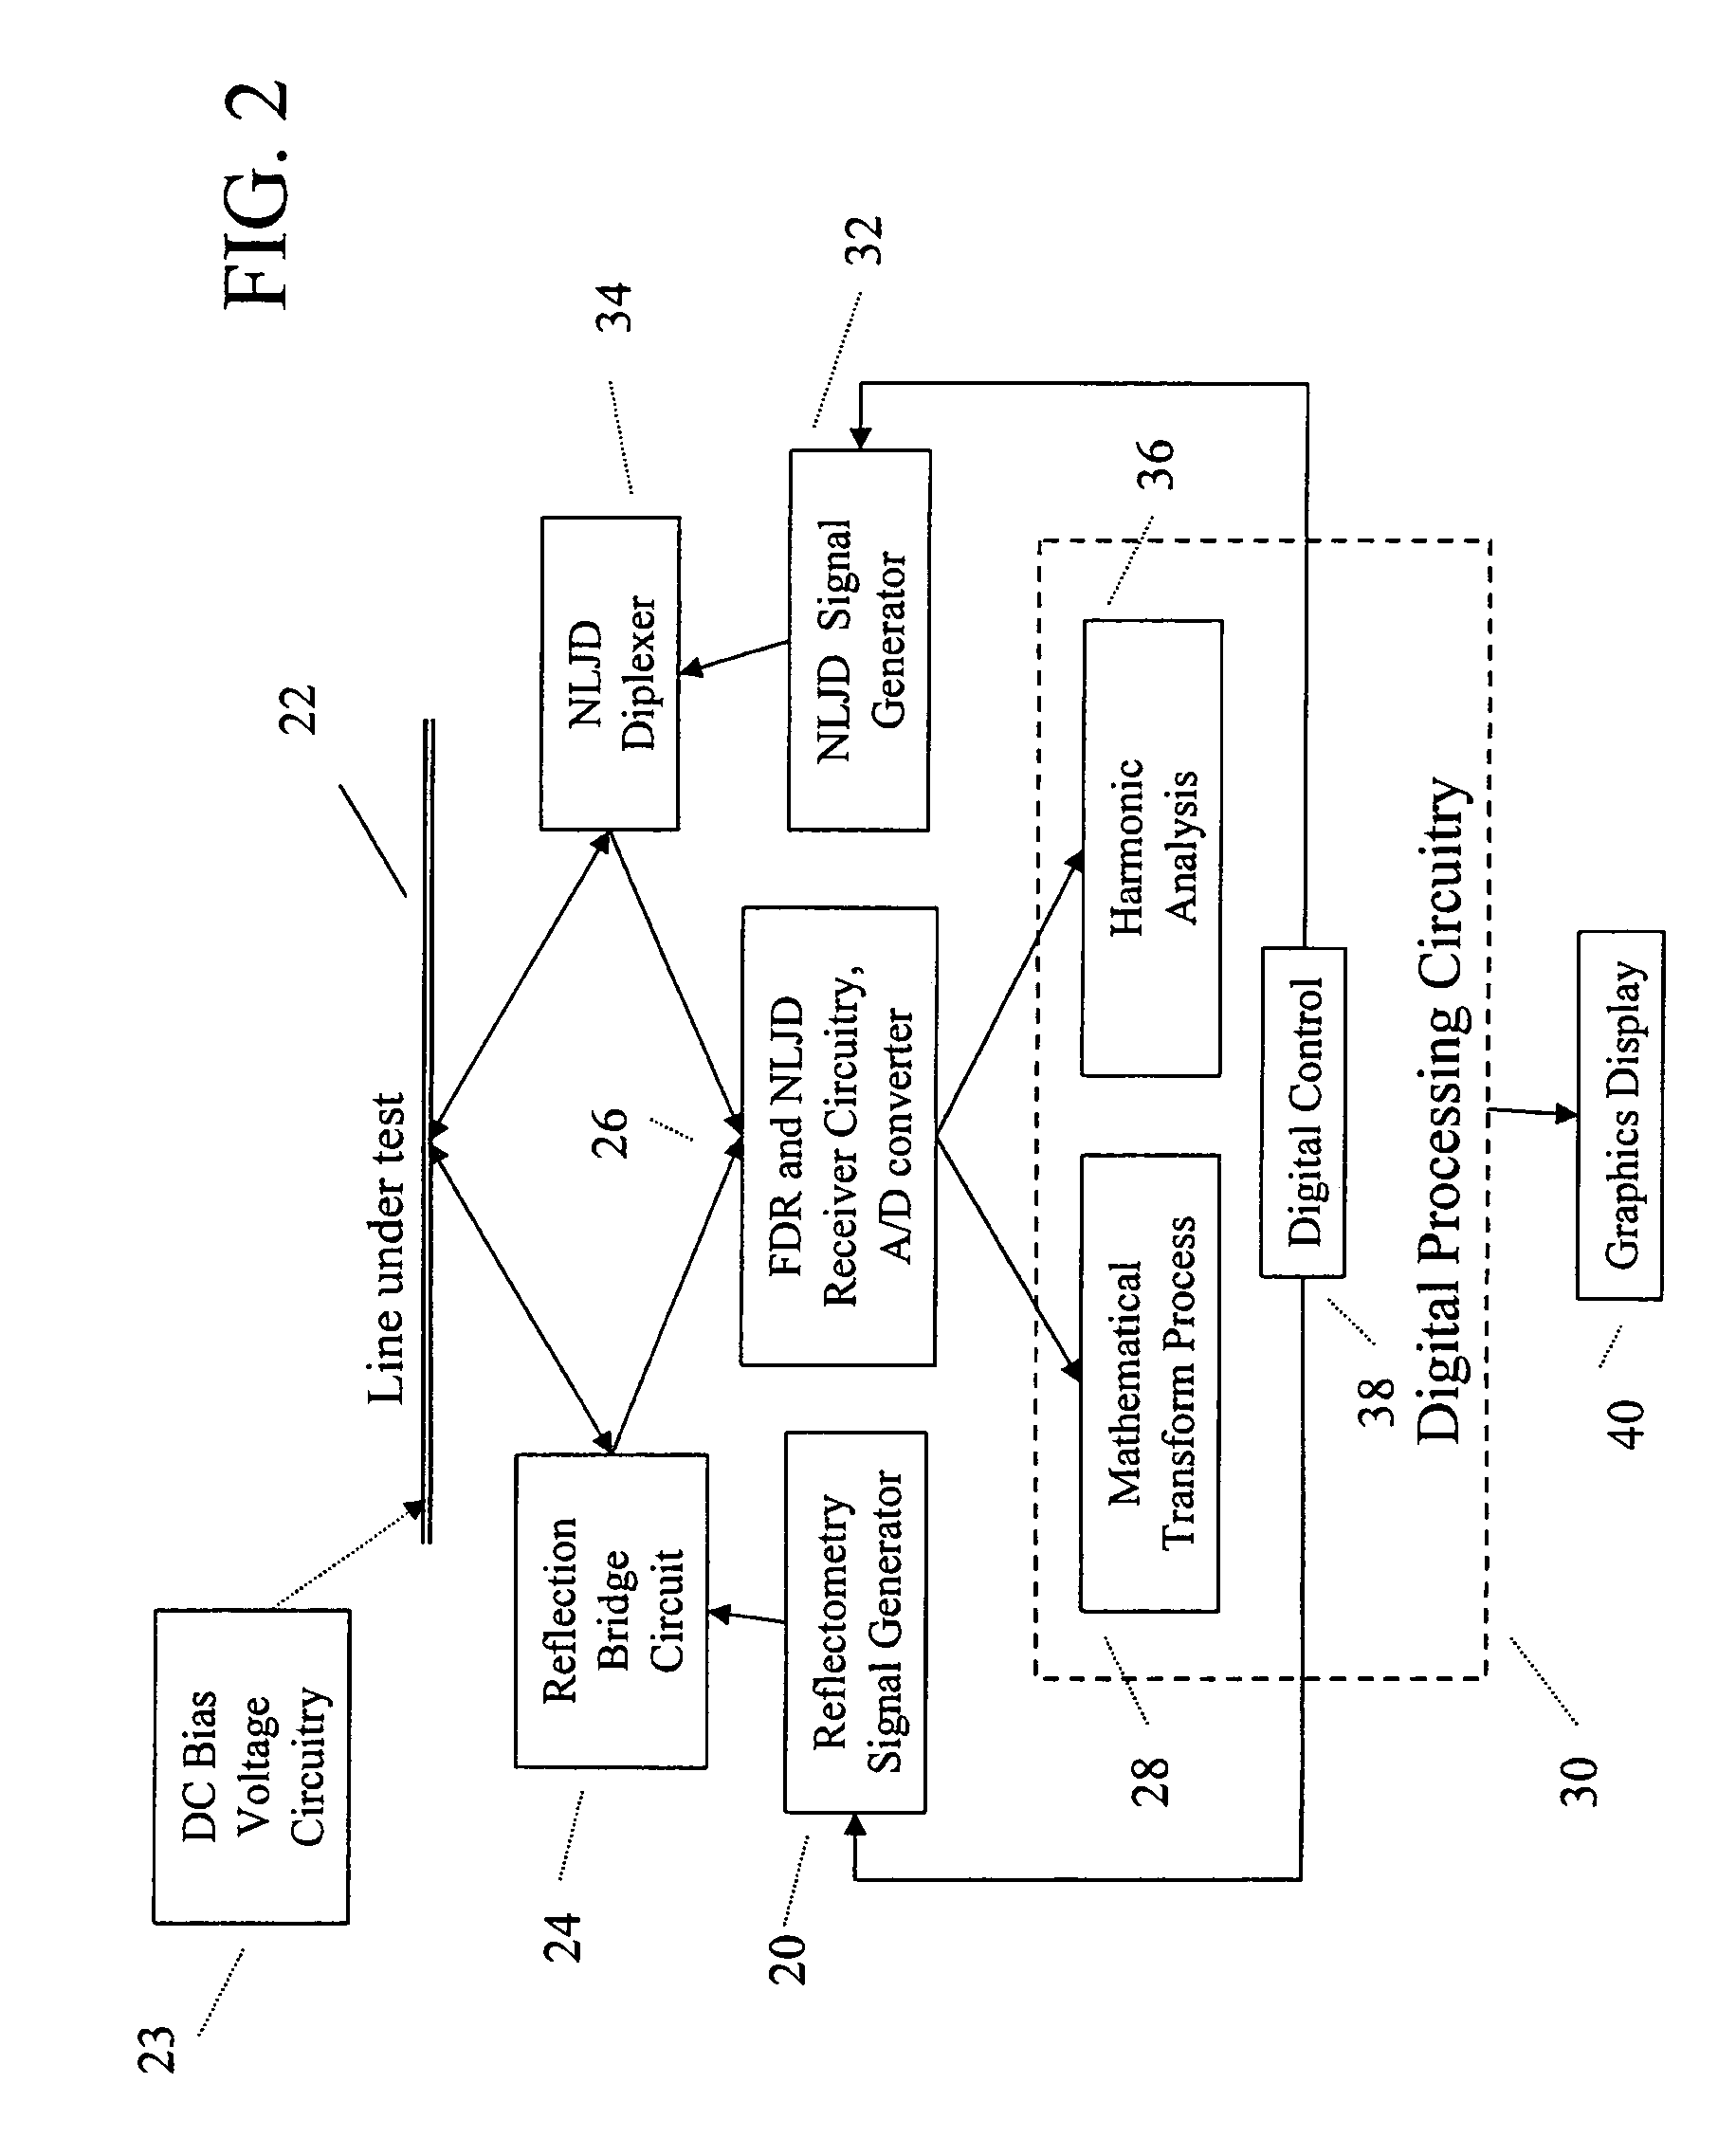 Surveillance device detection utilizing non linear junction detection and reflectometry